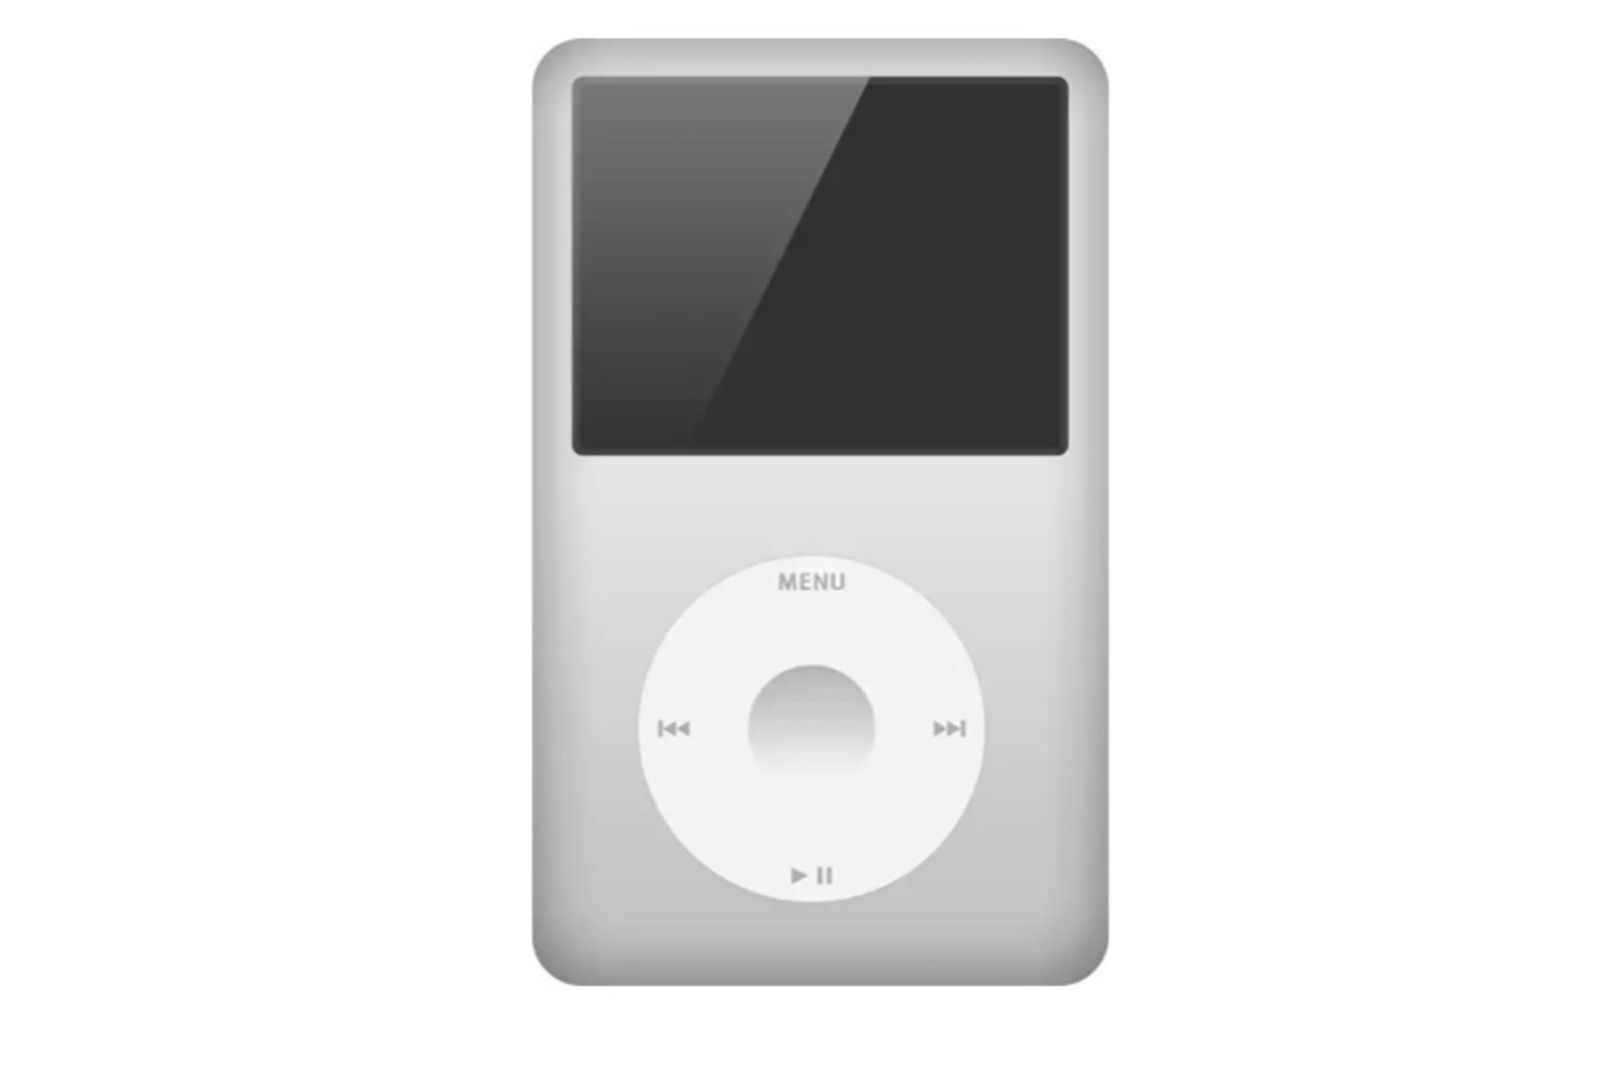 Every Apple iPod Model over the years (2001 to 2022) photo 10